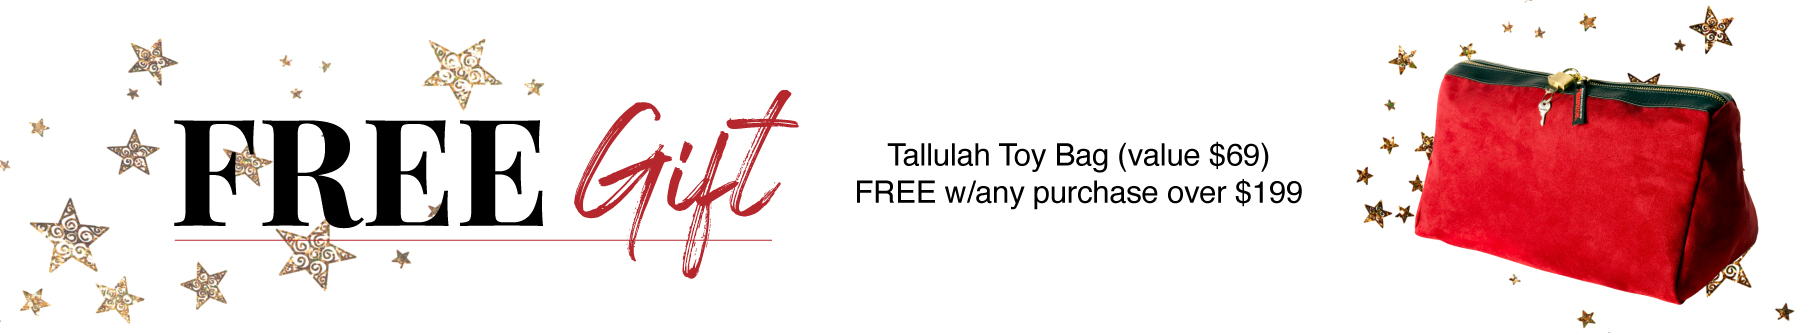 Tallulah Toy Bag with Purchase!